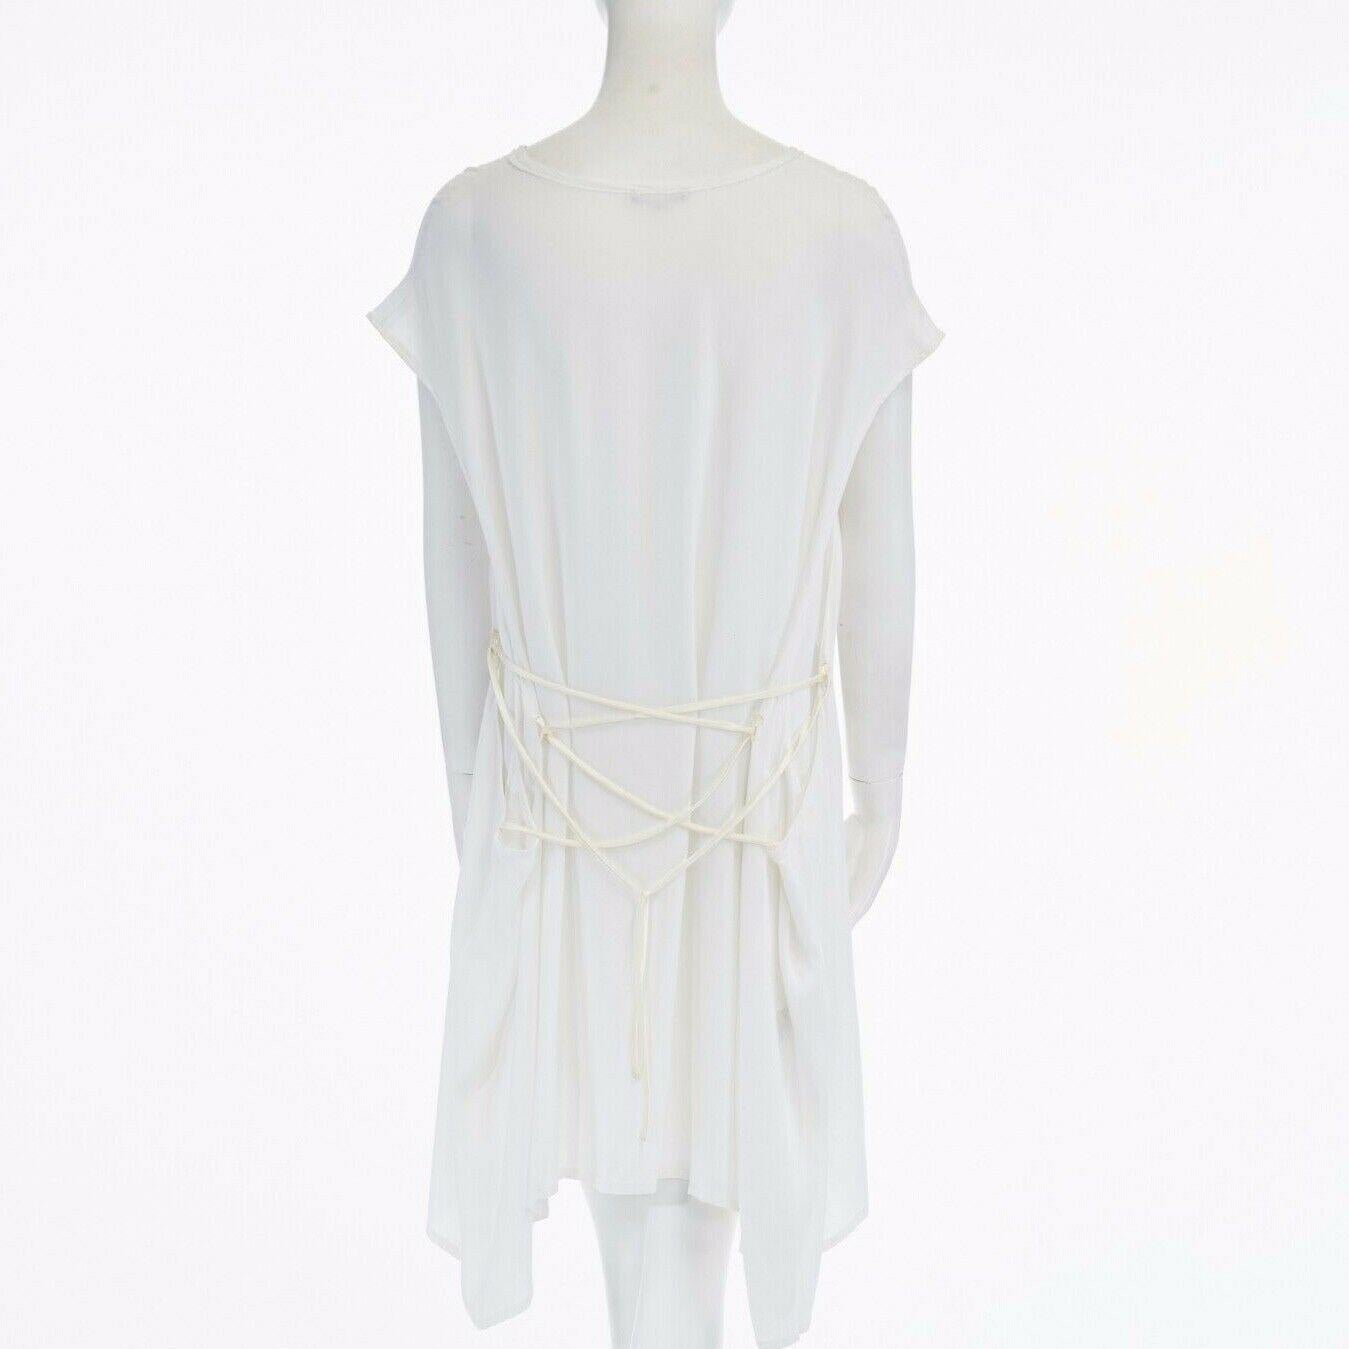 new ANN DEMEULEMEESTER white rayon tie back loose fit teeshirt dress FR34 US2 S
ANN DEMEULEMEESTERFROM THE SPRING SUMMER 2015 COLLECTION
RAYON, VISCOSE. WHITE. CAP SLEEVES. WIDE NECKLINE. FRAYED DETAIL ALONG NECKLINE. 
DROPPED ARMHOLE. ATTACHED TIE